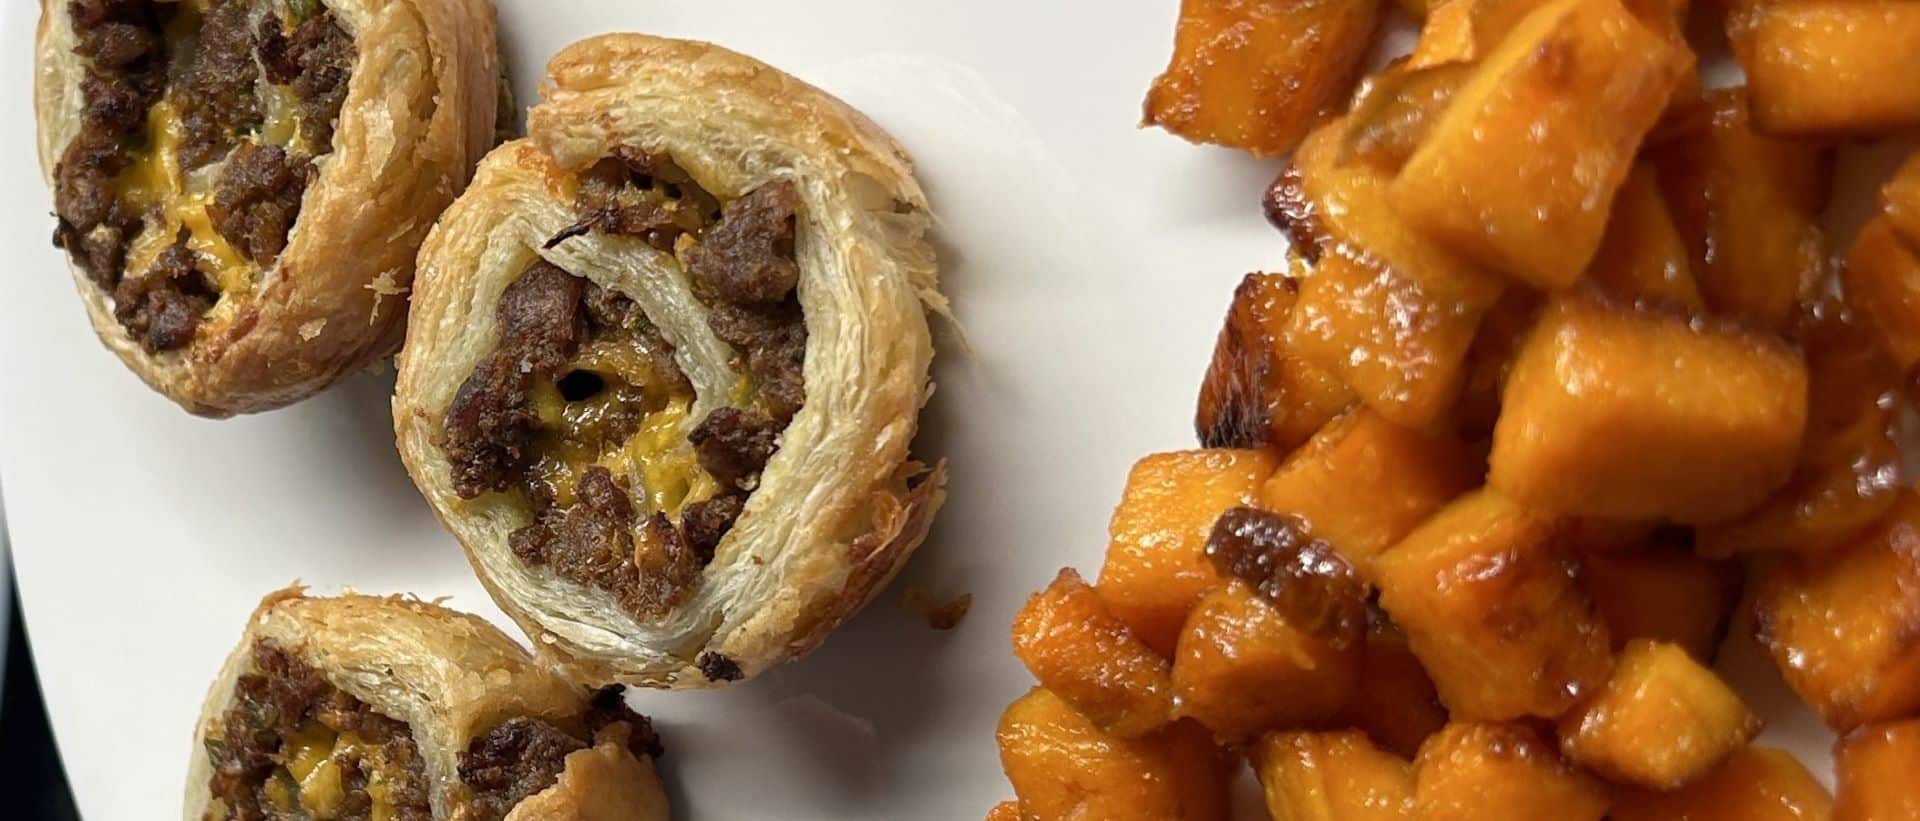 Breakfast foods of sweet potatoes and sausage rolled in puff pastry